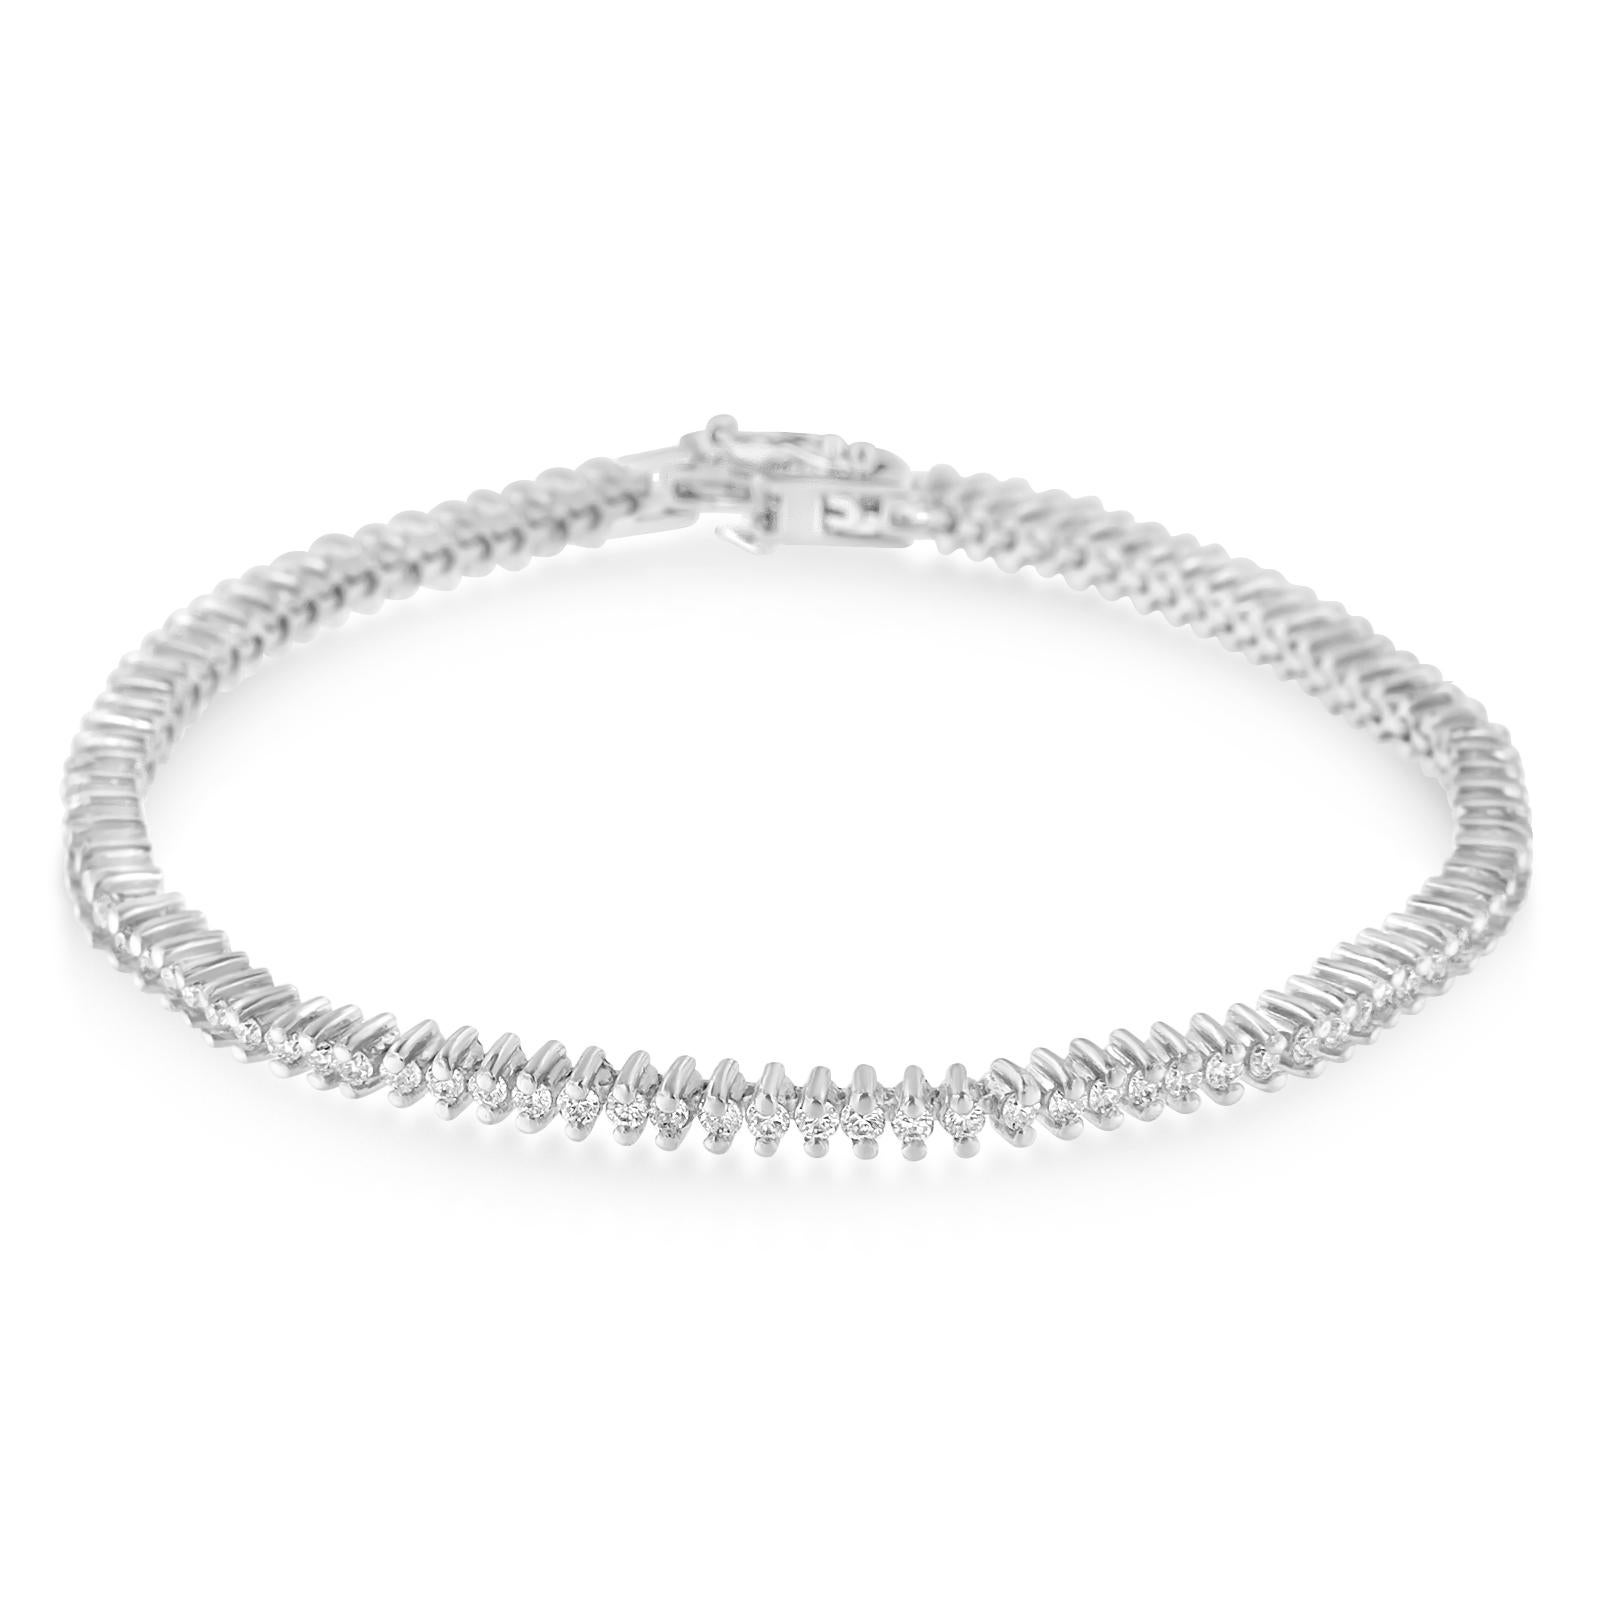 There's a timeless quality to this bracelet. Maybe it's the dazzling display of diamonds set in 18-karat gold... or maybe it's the way her face will light up every time she wears it. Comes with 94 round-cut diamonds, set in 2 prong 18k white gold